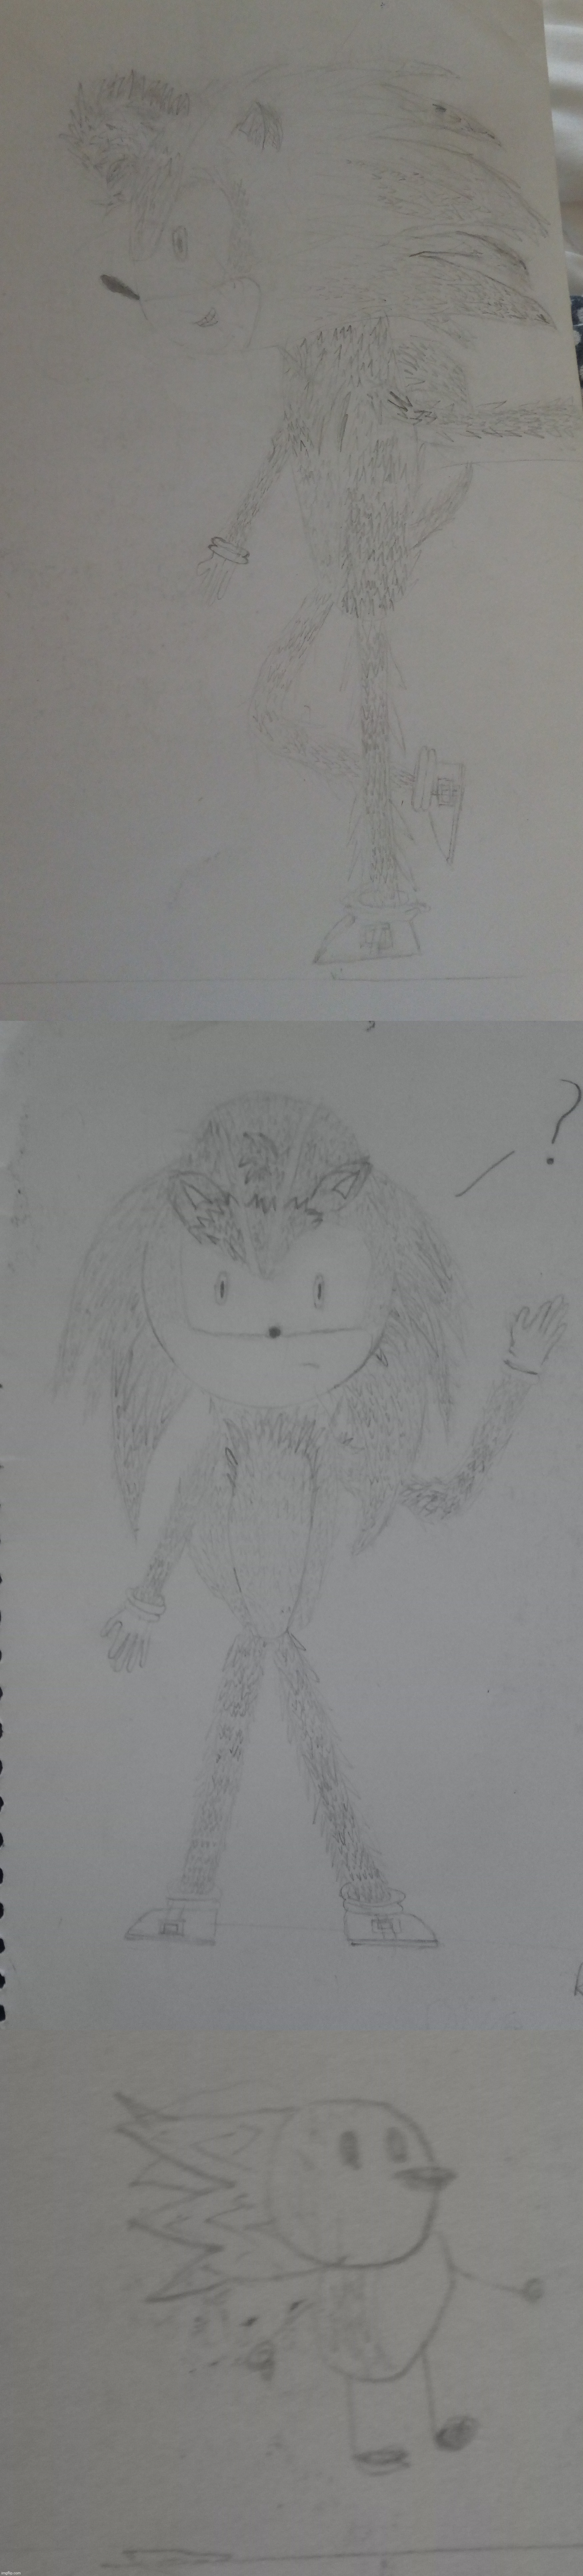 My Sonic drawing and doodle | image tagged in sonic the hedgehog,sonic,drawing,drawings,doodle,sega | made w/ Imgflip meme maker